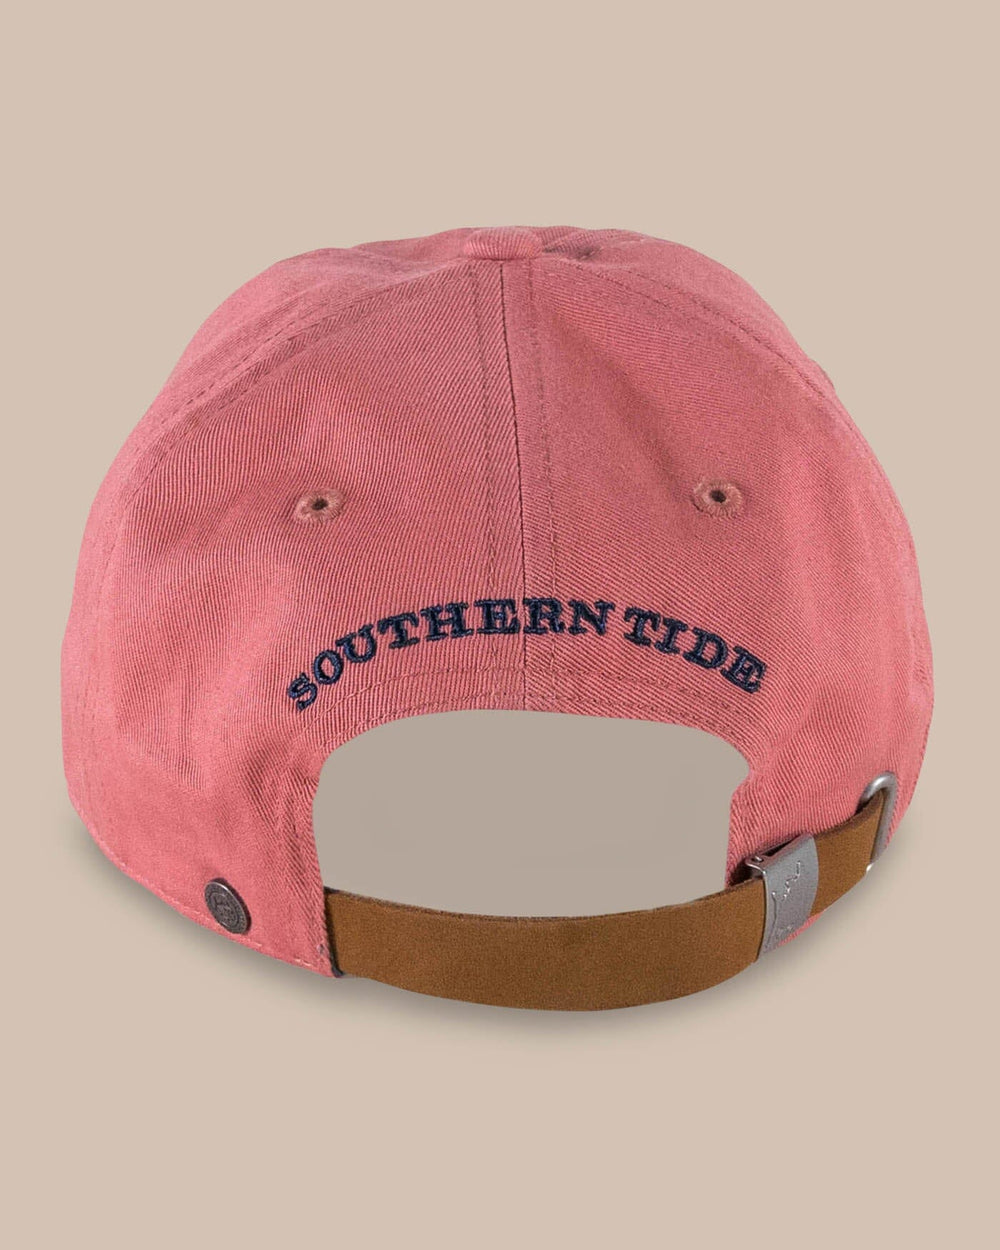 The back view of the Southern Tide Mini Skipjack Leather Strap Hat by Southern Tide - Conch Shell